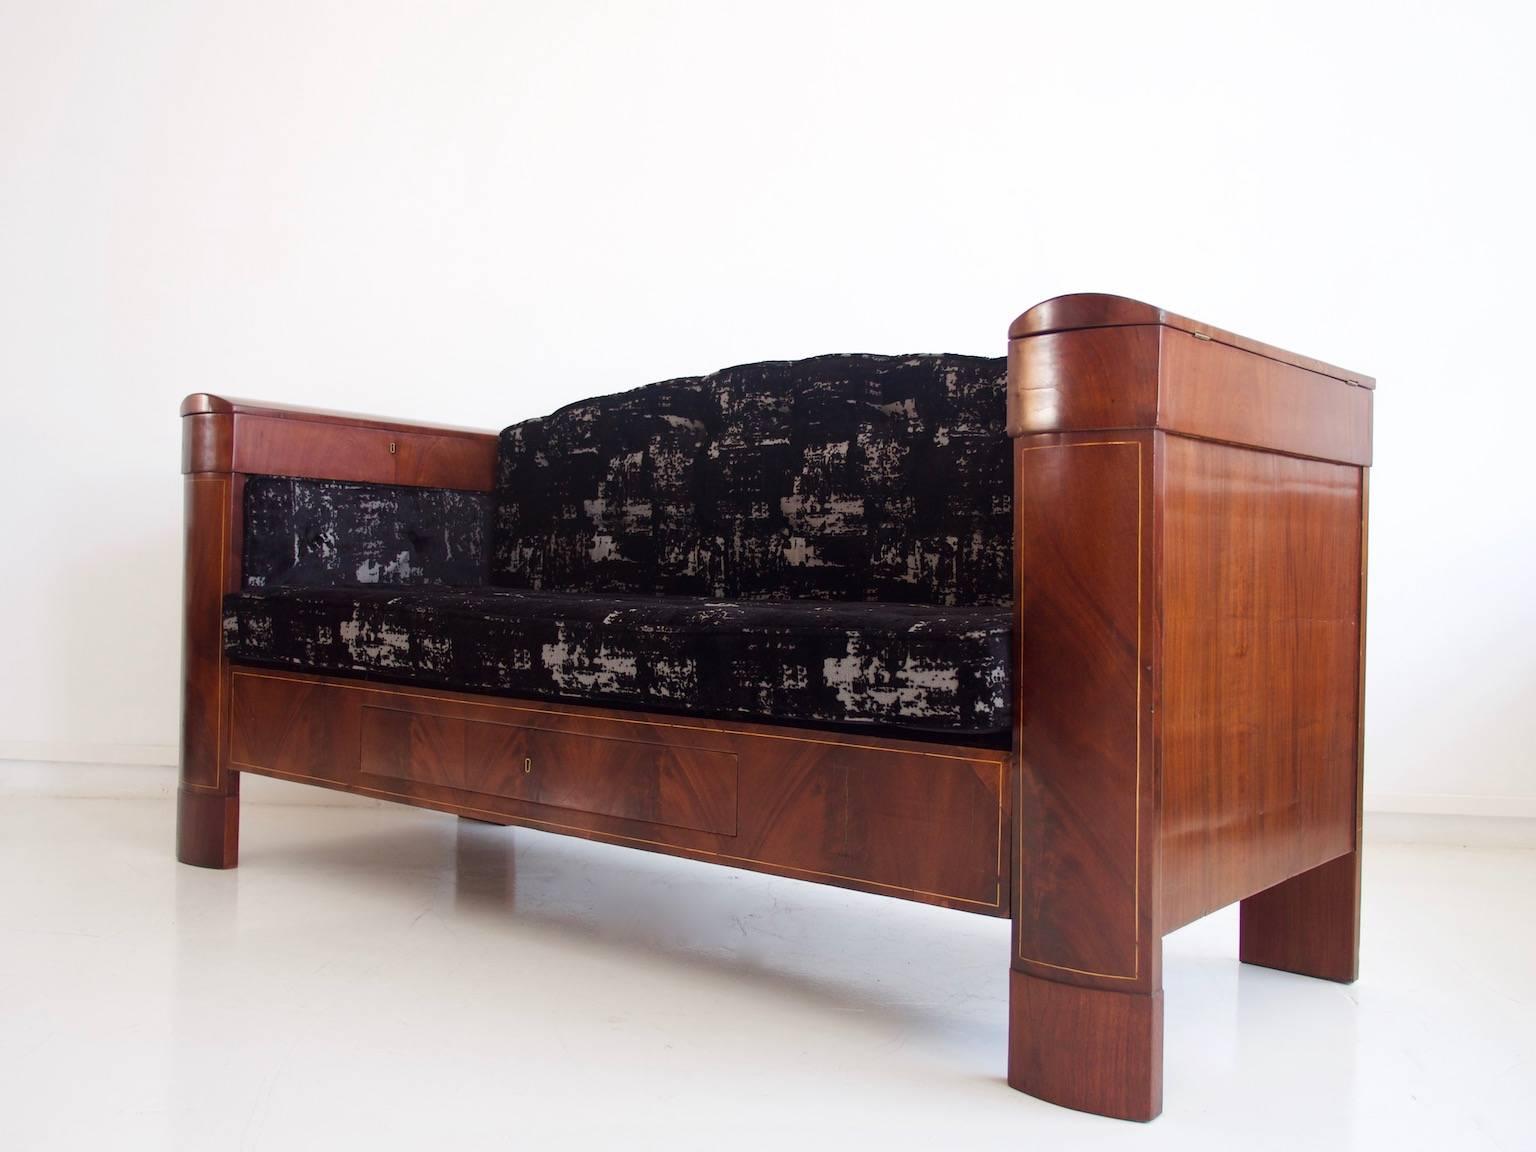 Mahogany cabinet sofa / daybed from the Danish Empire period, circa 1820s, with inlaid strips of light wood. The armrests have lockable compartments and there is a drawer under the seat. Keys included. Restored and reupholstered with patterned black